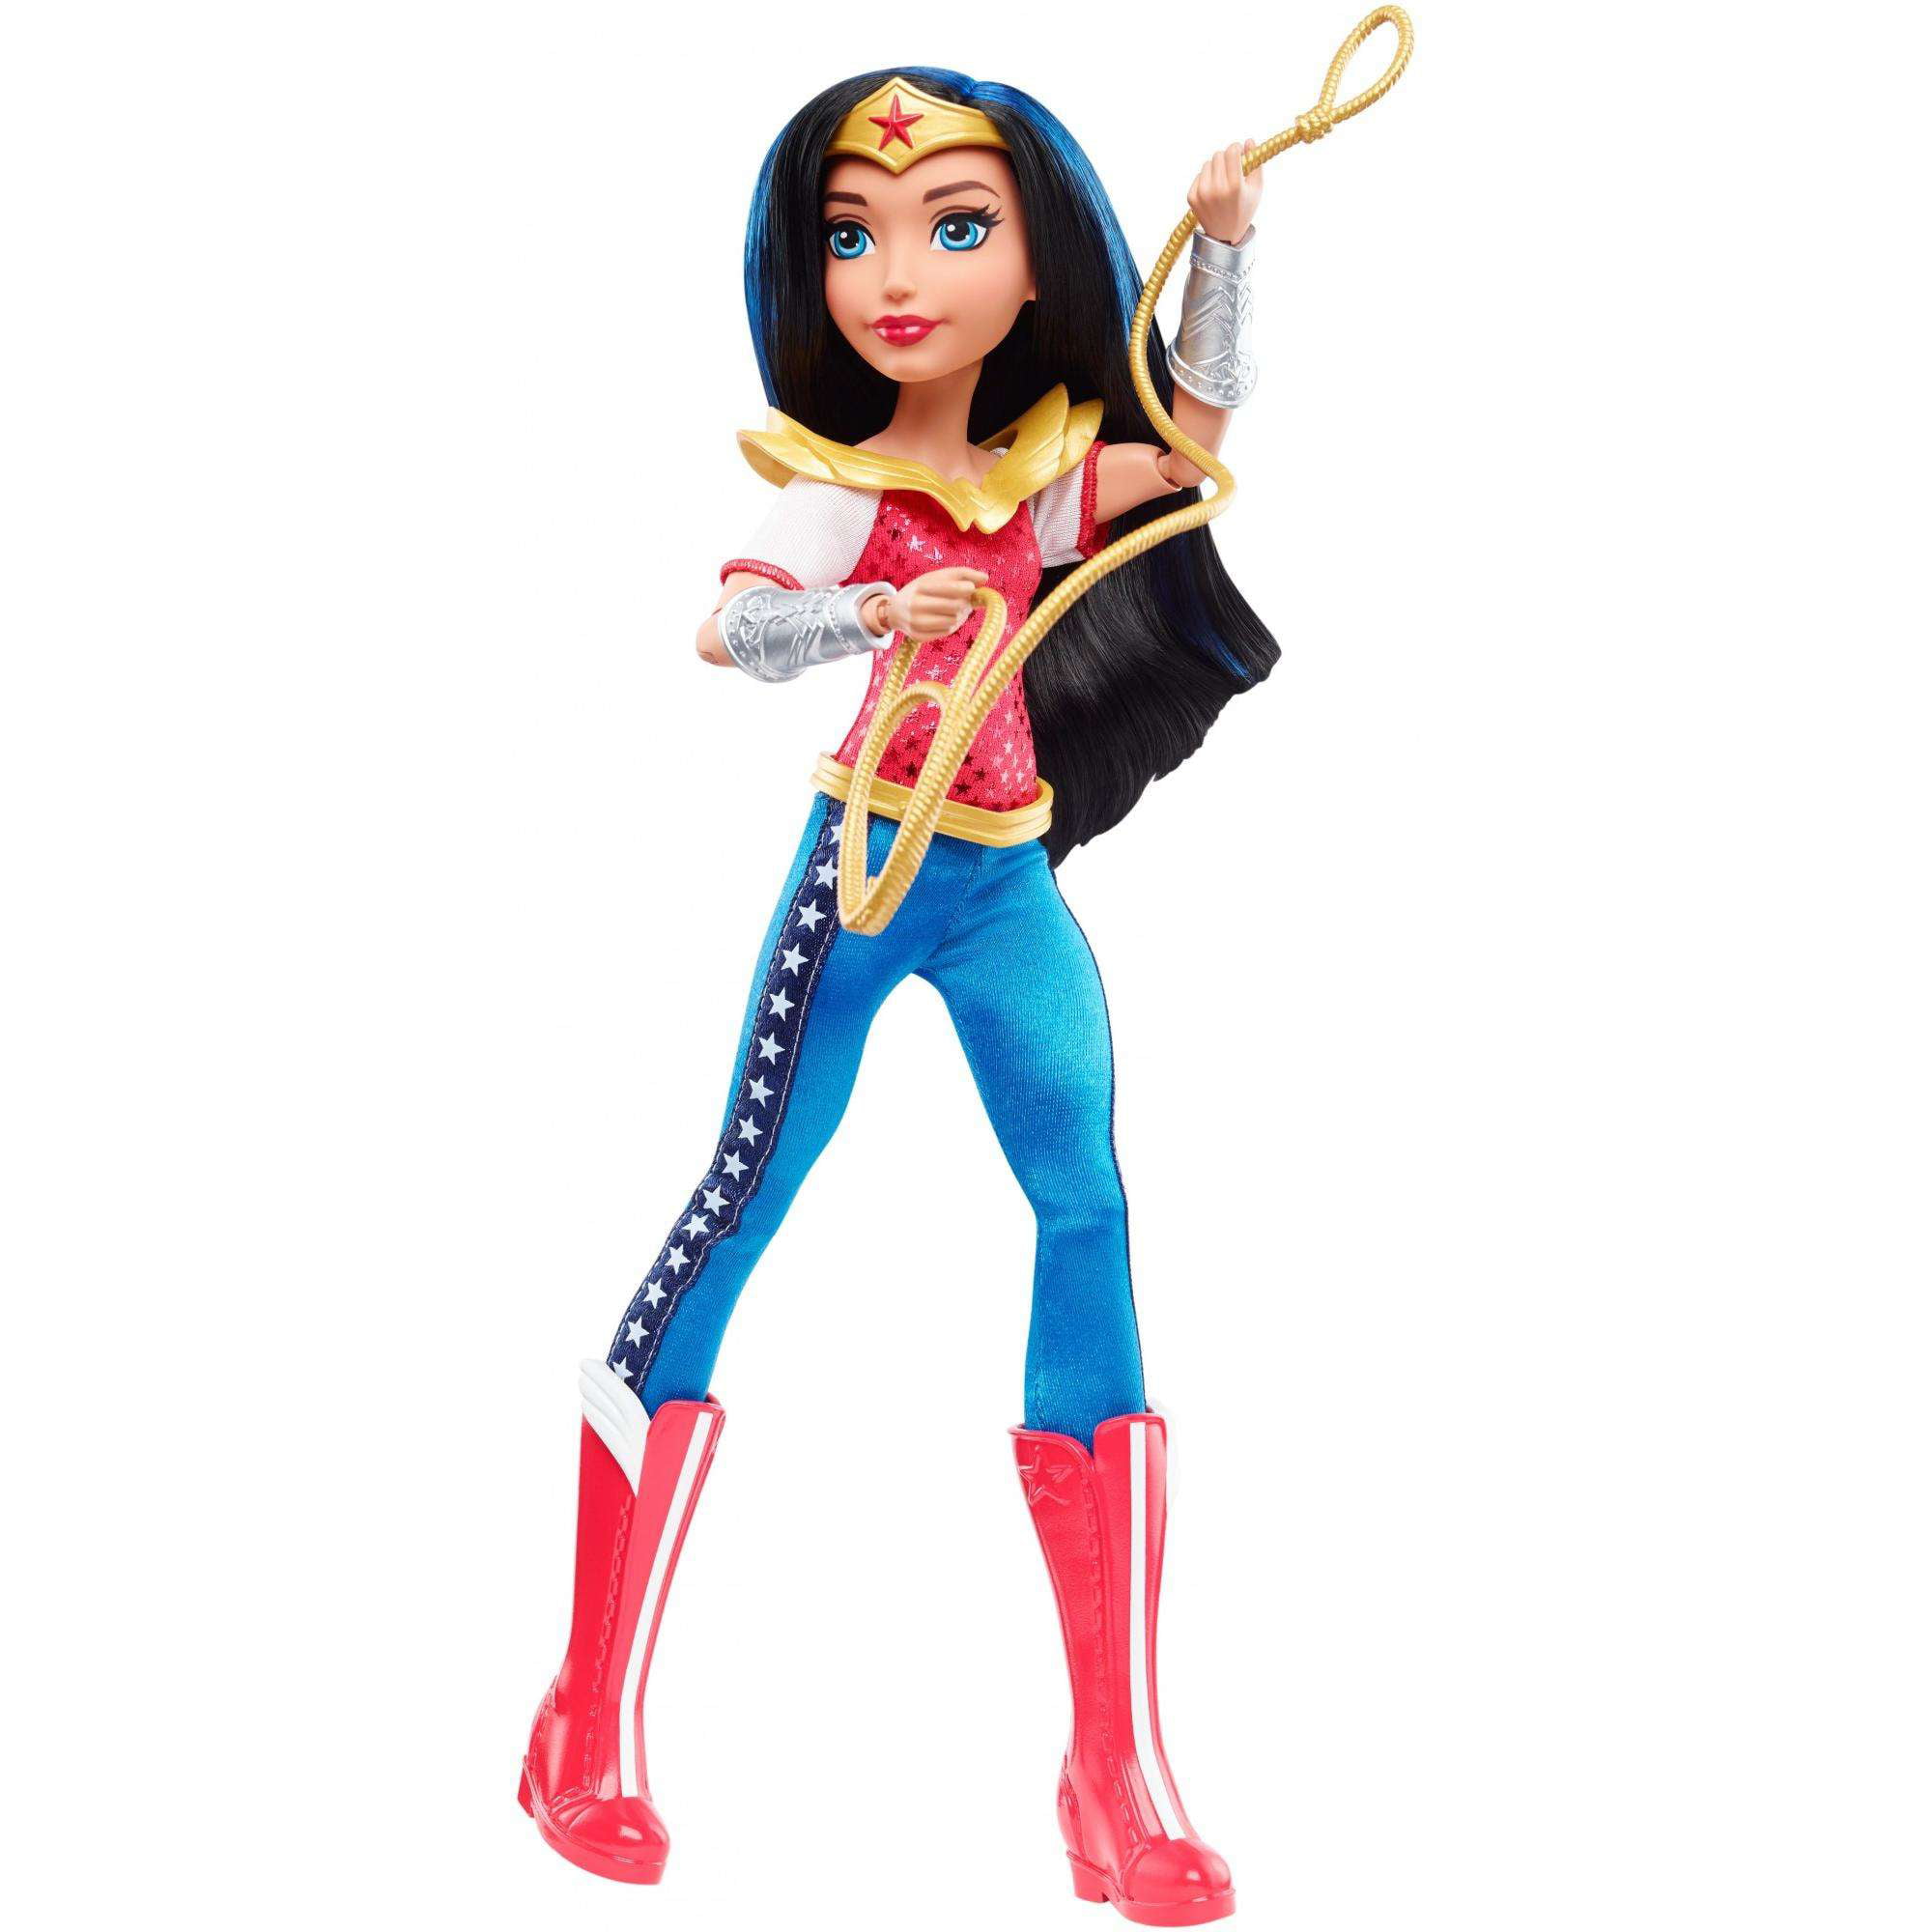 US Cute Wonder Woman Hero Movie Action Figure Doll Cake Topper Decoration Toys 